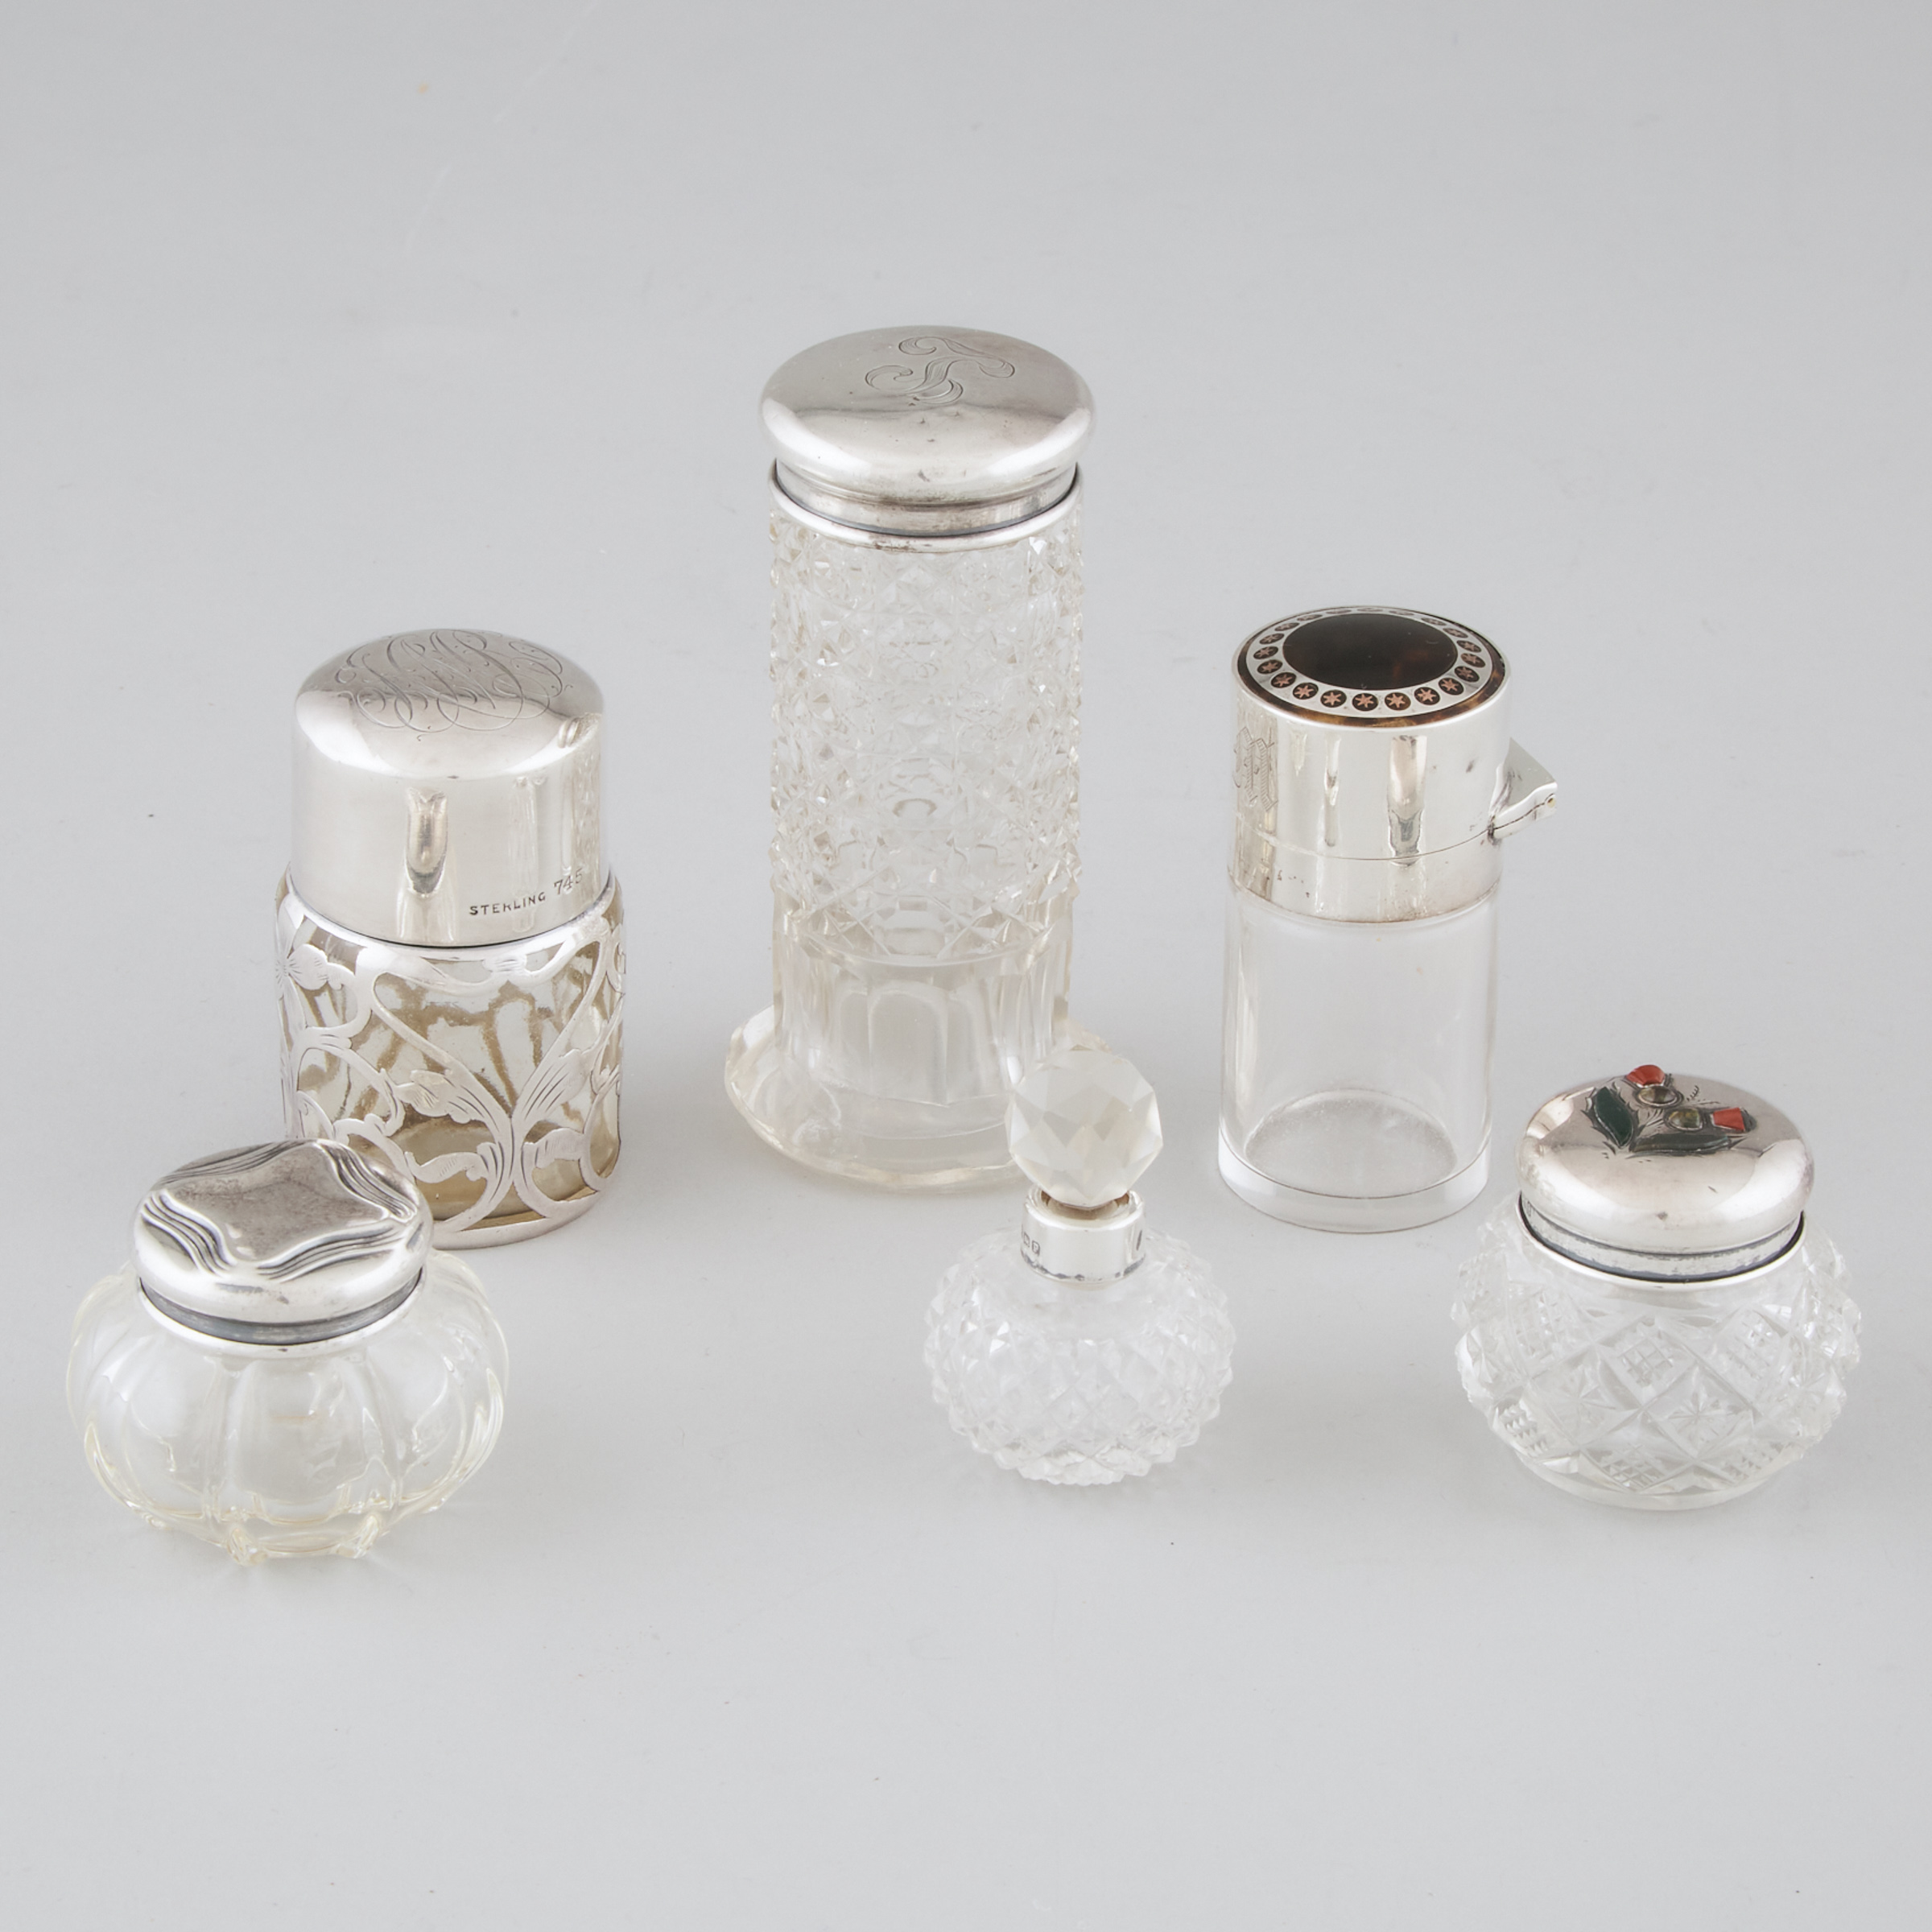 Six English and North American Silver Mounted Glass Perfume Bottles and Jars, late 19th/early 20th century